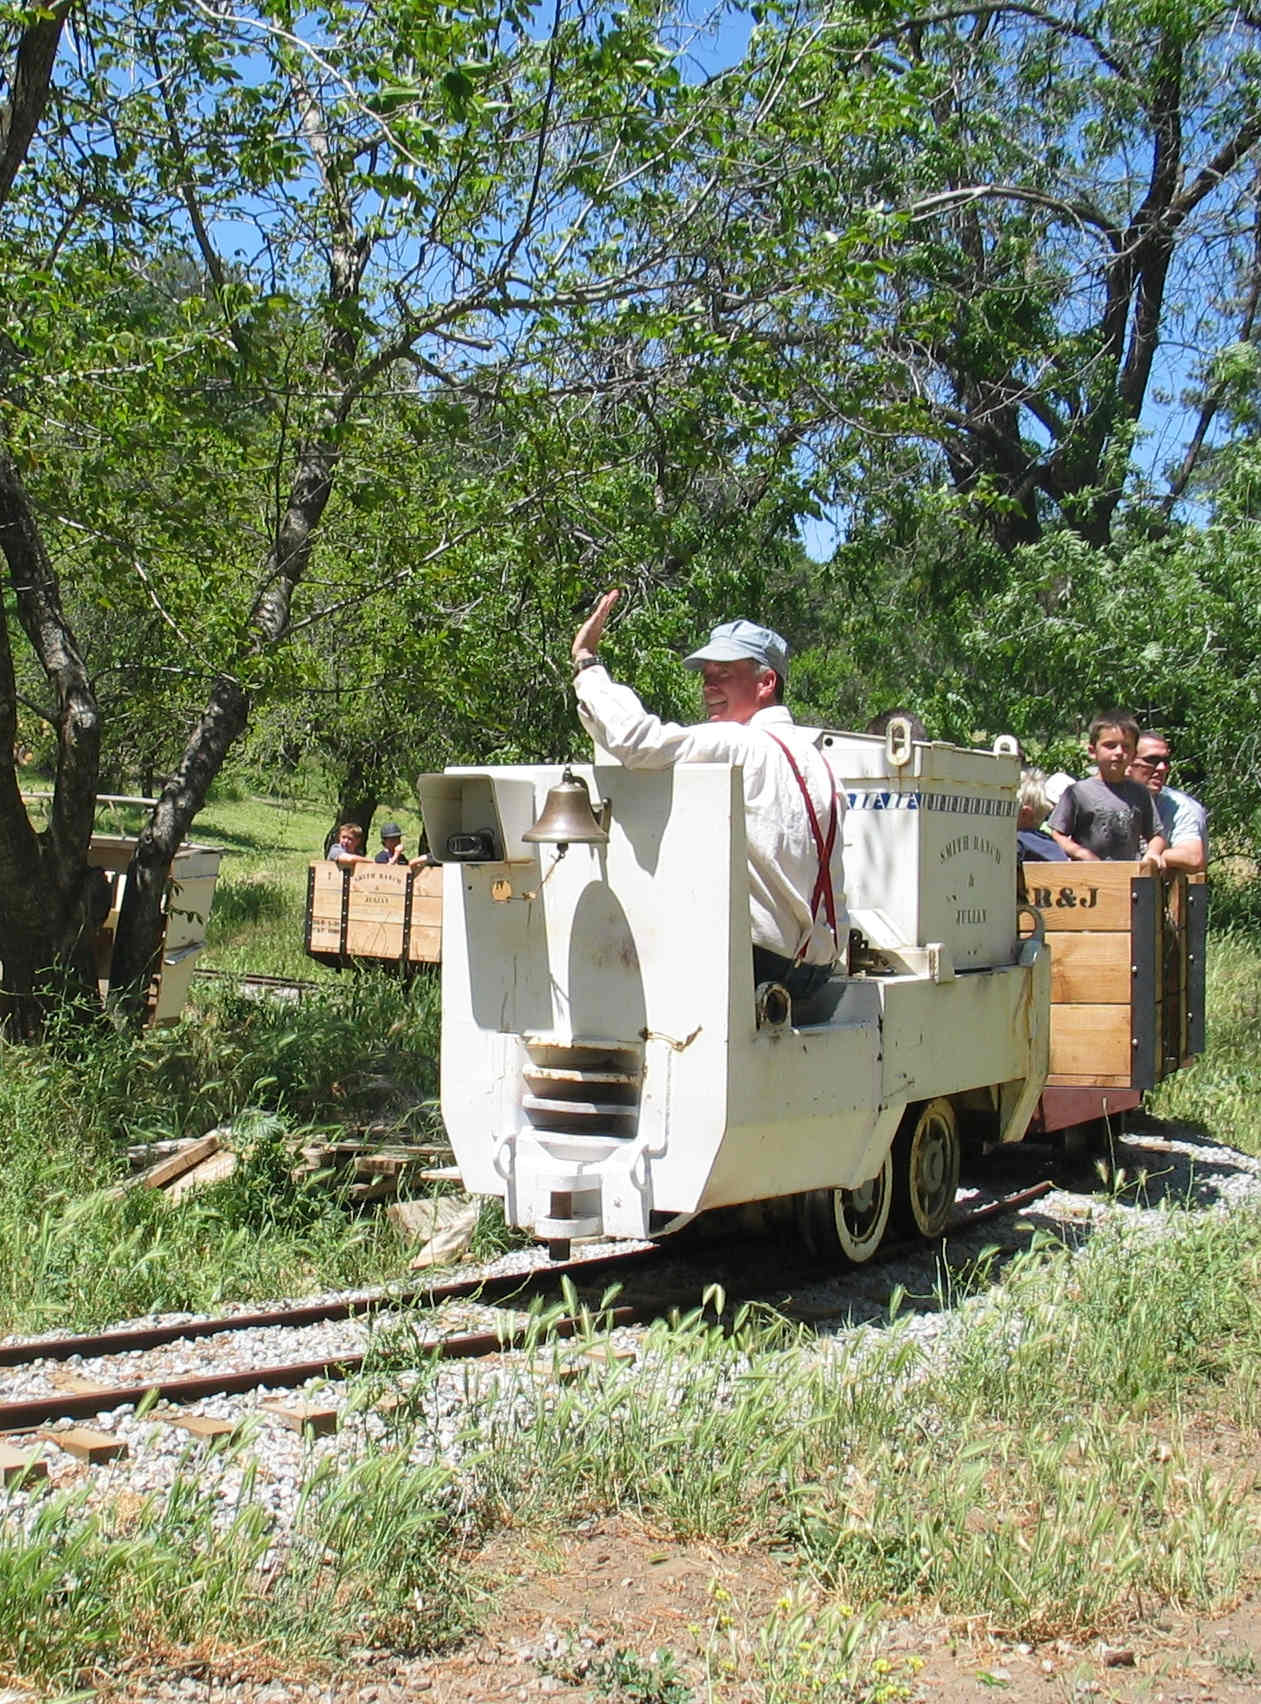 Author Gregory O. Smith driving a battery-powered Gold Mining Locomotive, pulling passengers in train cars, during his popular and successful living history adventure tour program.